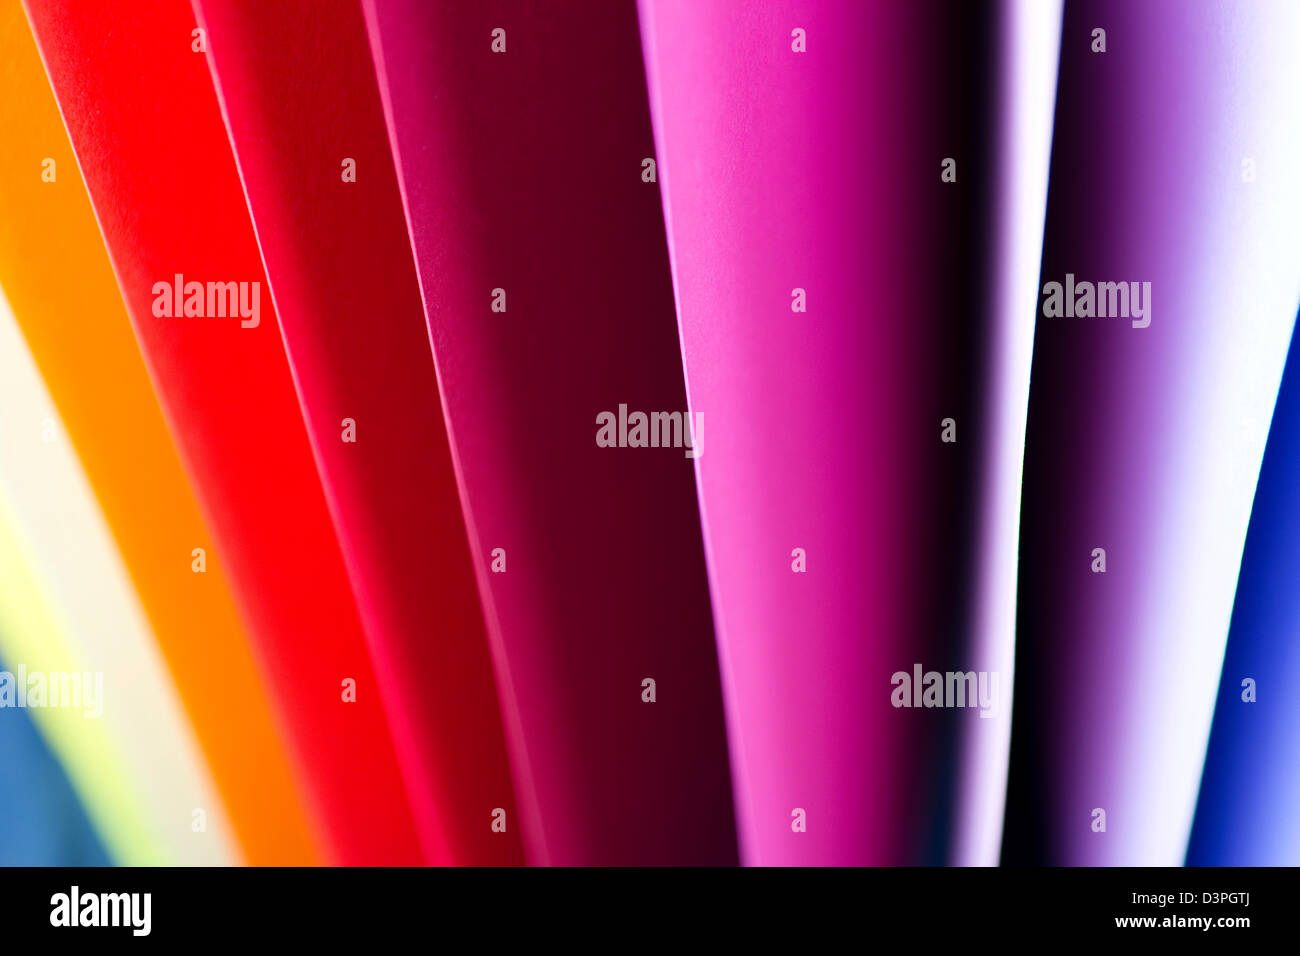 macro image of colorful sheets of paper Stock Photo